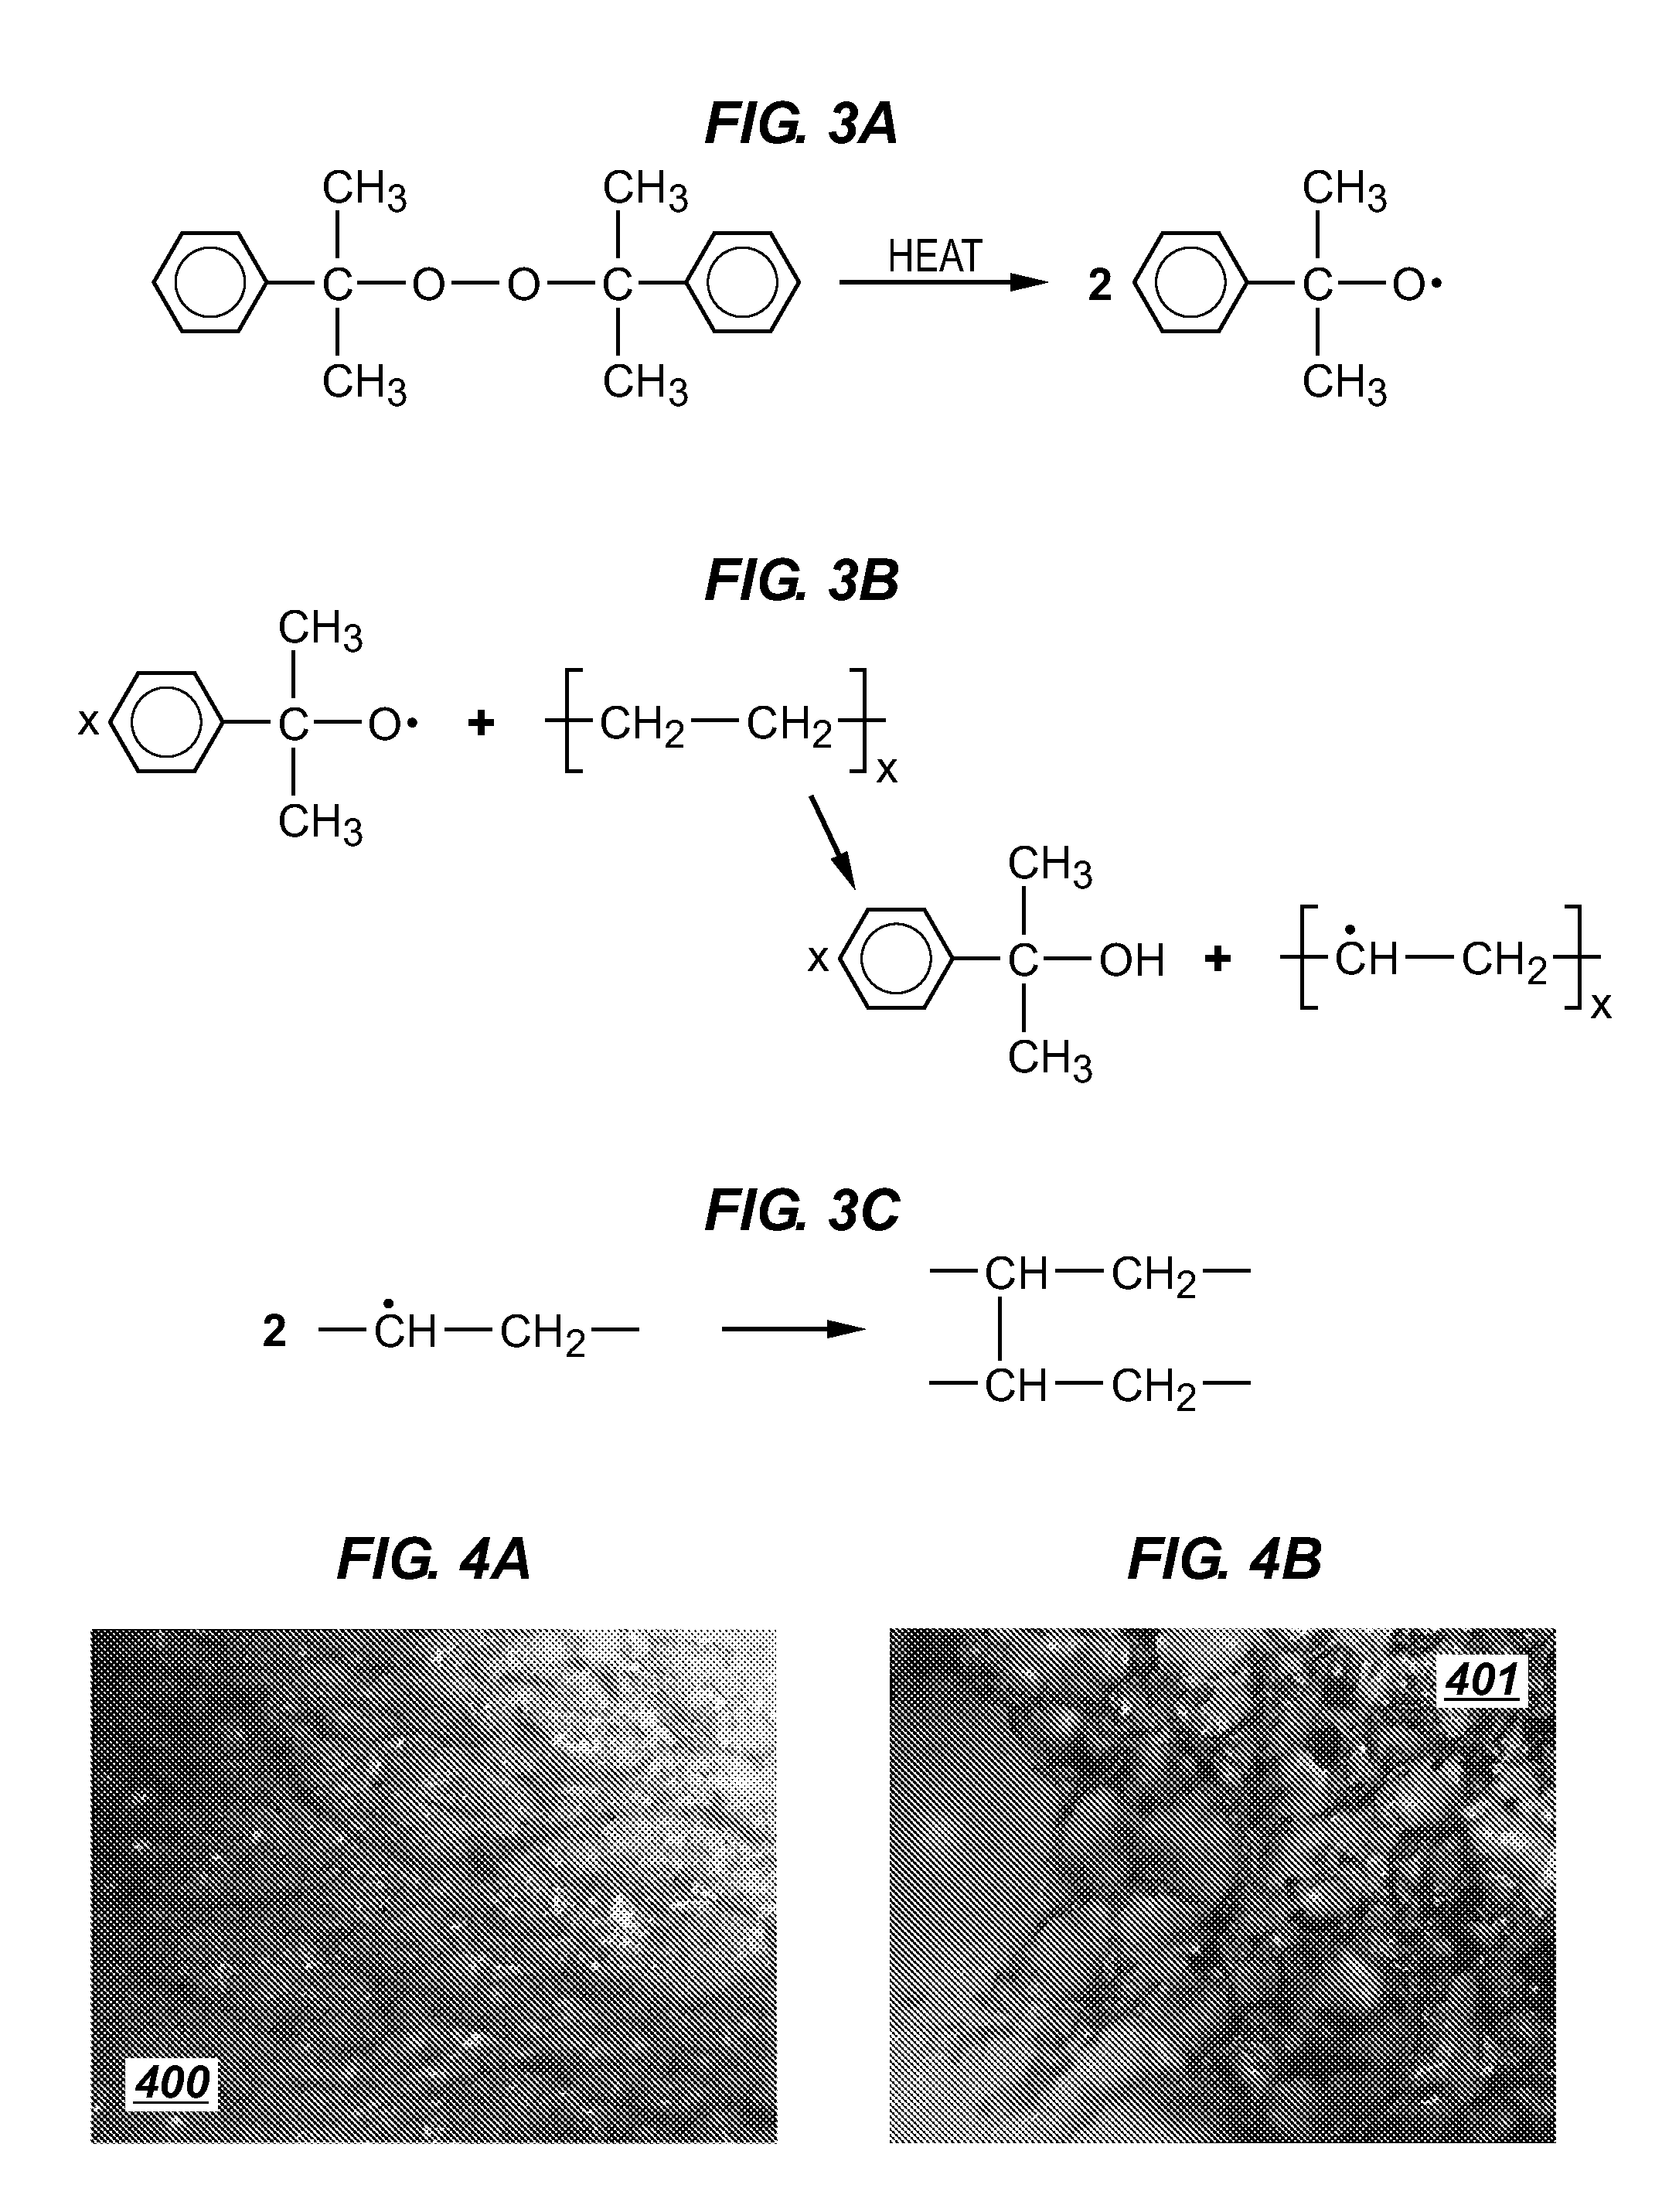 Foam compositions for selective recovery of oil spills and other applications